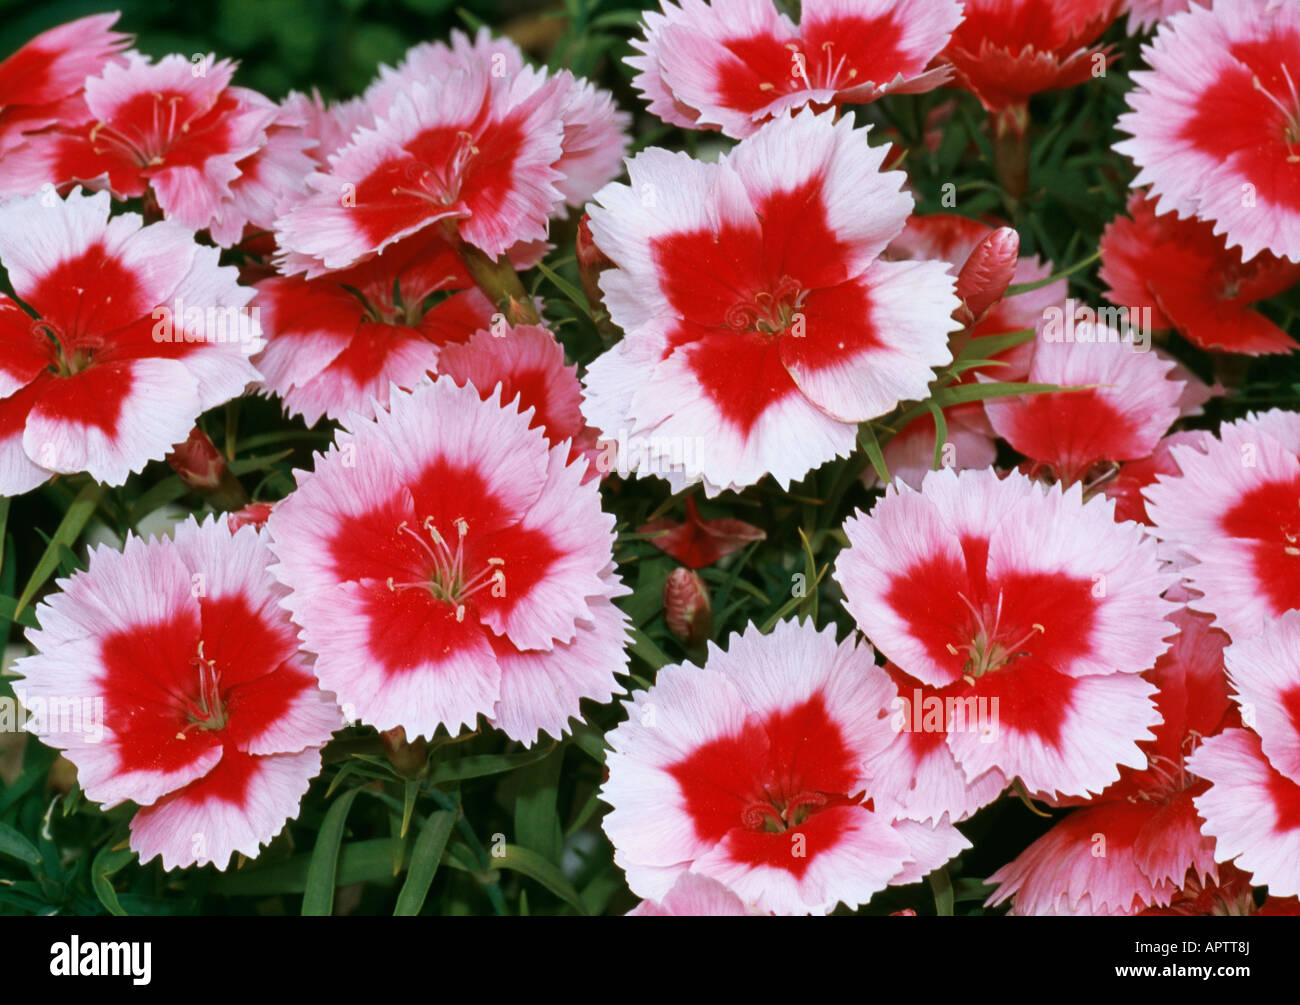 Dianthus barbatus pink with red centres dense cluster of sweet smelling delicate flower Stock Photo